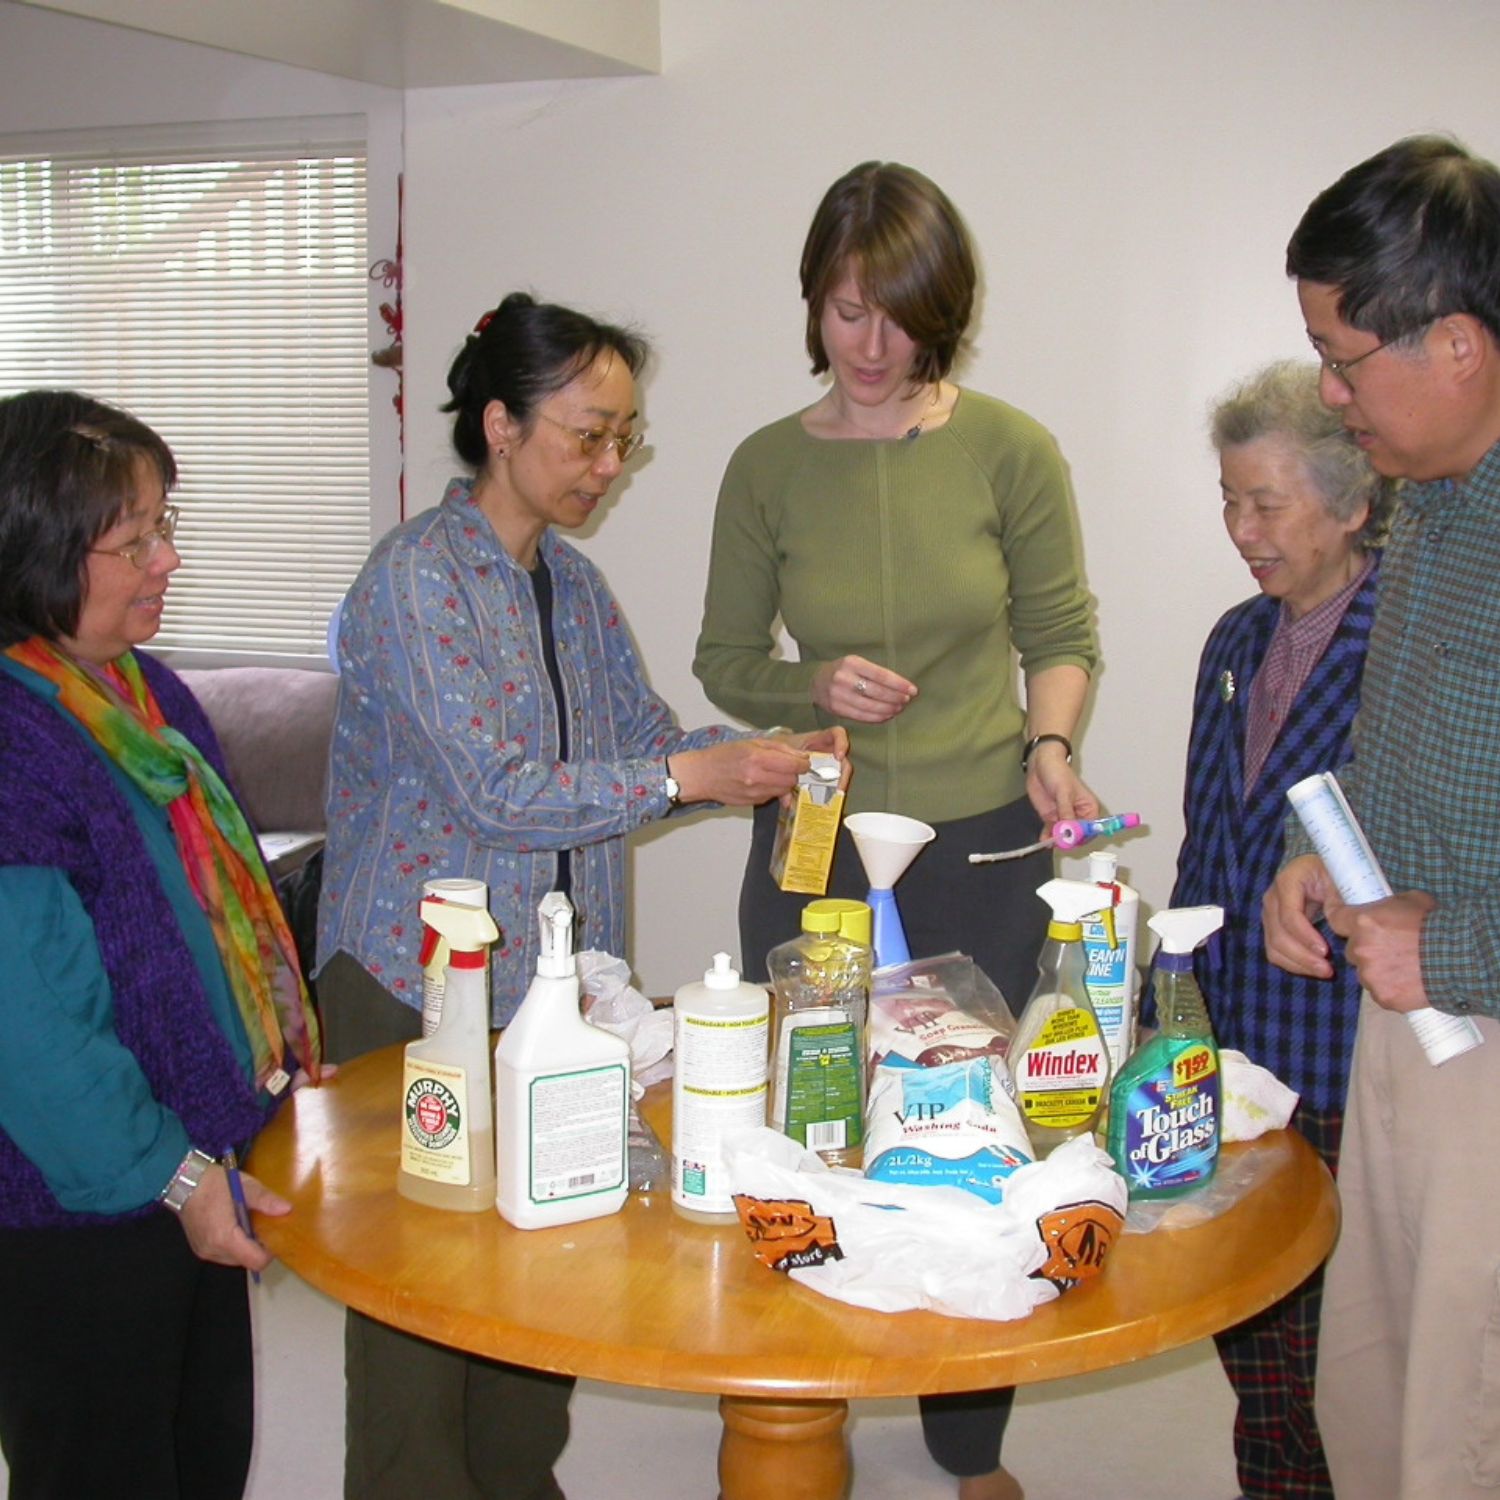 Christianne leading a ToxicSmart workshop with the Taiwanes Green Club in Vancouver when she led our Clean Air and Water program.